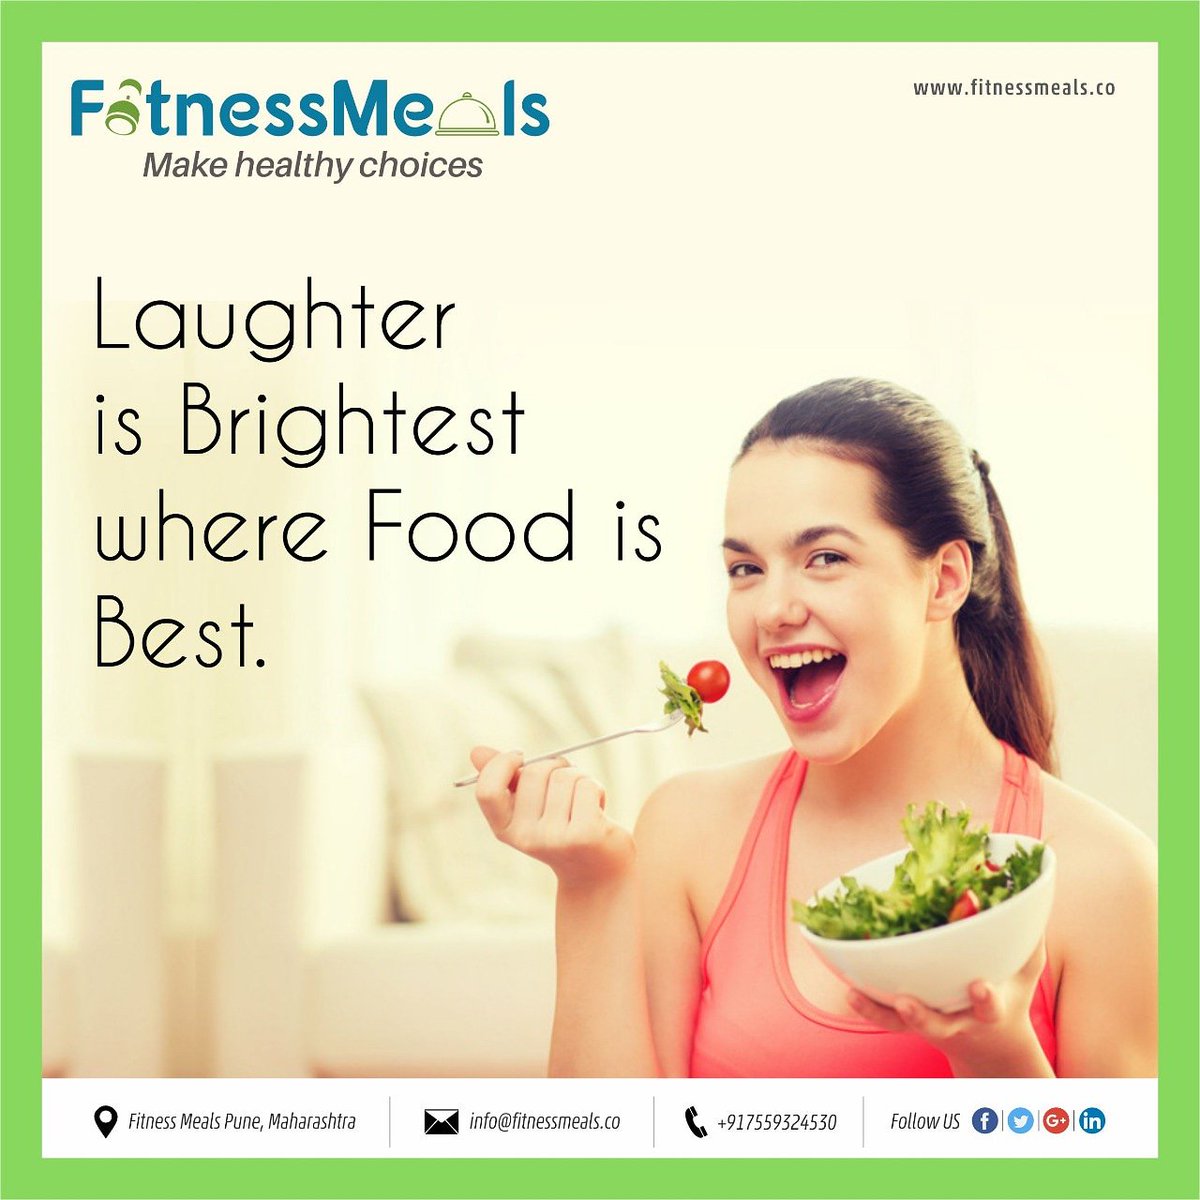 Flaunt your natural smile by having healthy meal.
Order your healthy meal online #fitnessmeals
Contact @7559324530
#healthymeal #healthyfood #fit #motivation #gym #healthylife #followforfollowback #health #healthydiet  #bodybuilding #foodie #eathealthy #cleaneating #foodporn #l4l